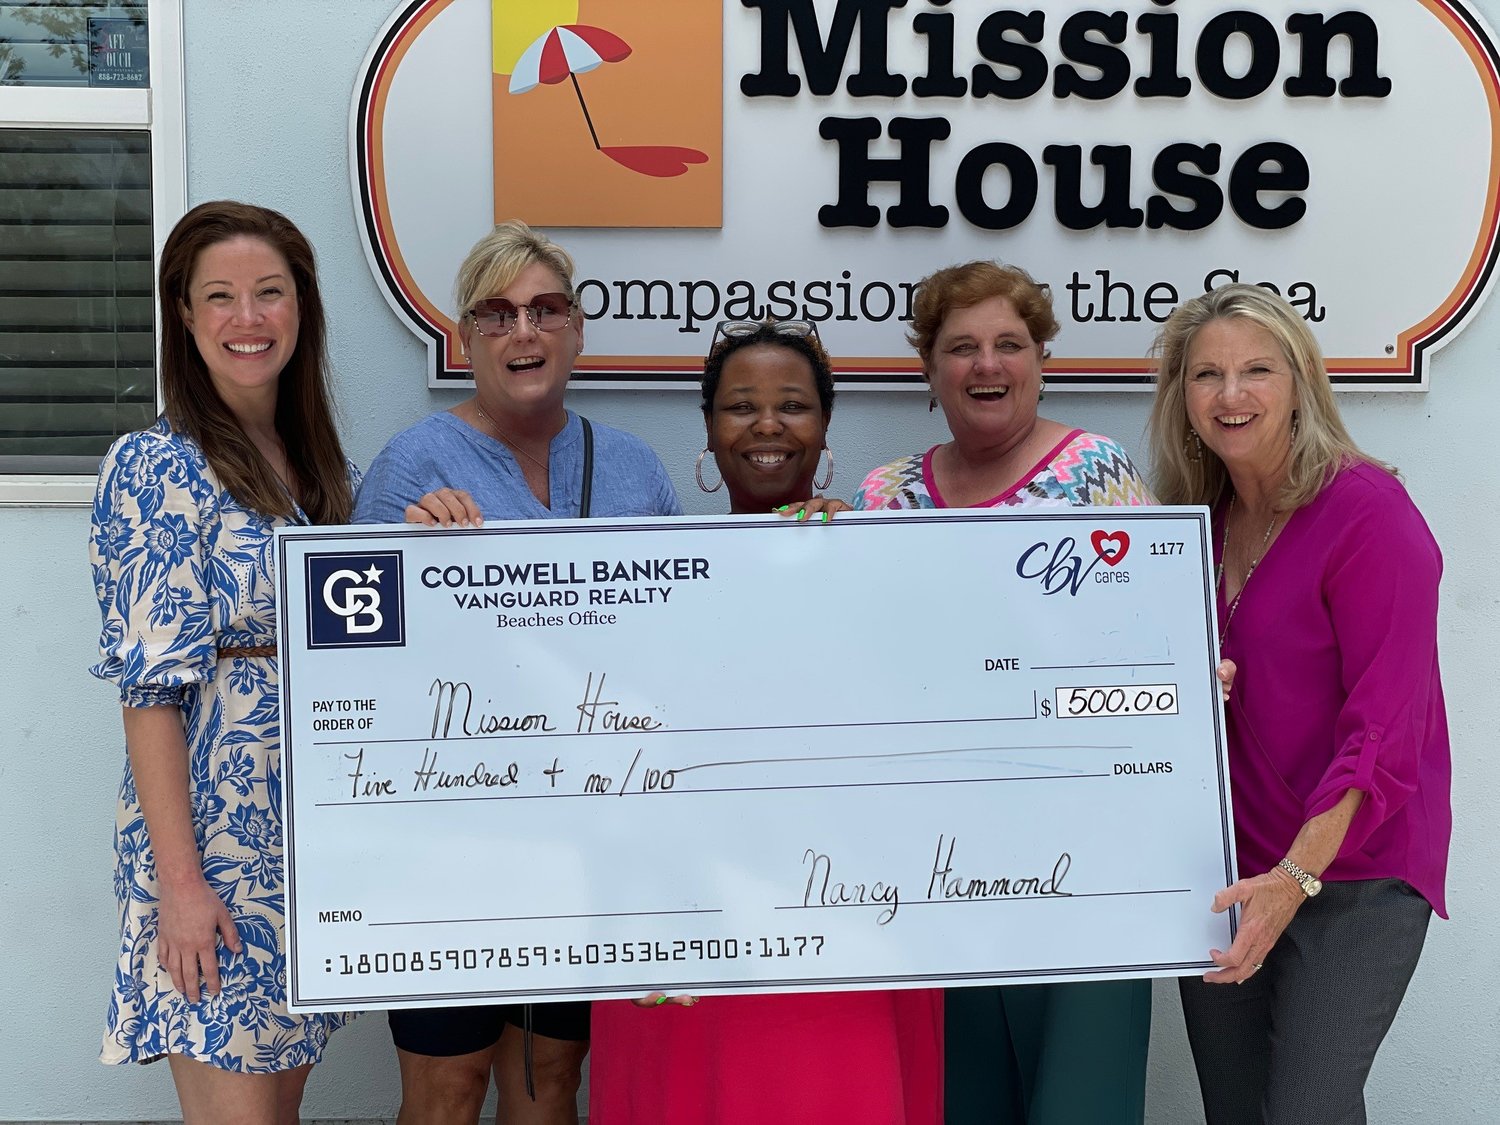 Pictured from left: CBV Cares Administrator Kate Richardson and Realtor associate Peyton Stockton, Mission House Program Director Natalie Collier, CBV Cares Realtors Nancy Hammond and Carole Bayer.